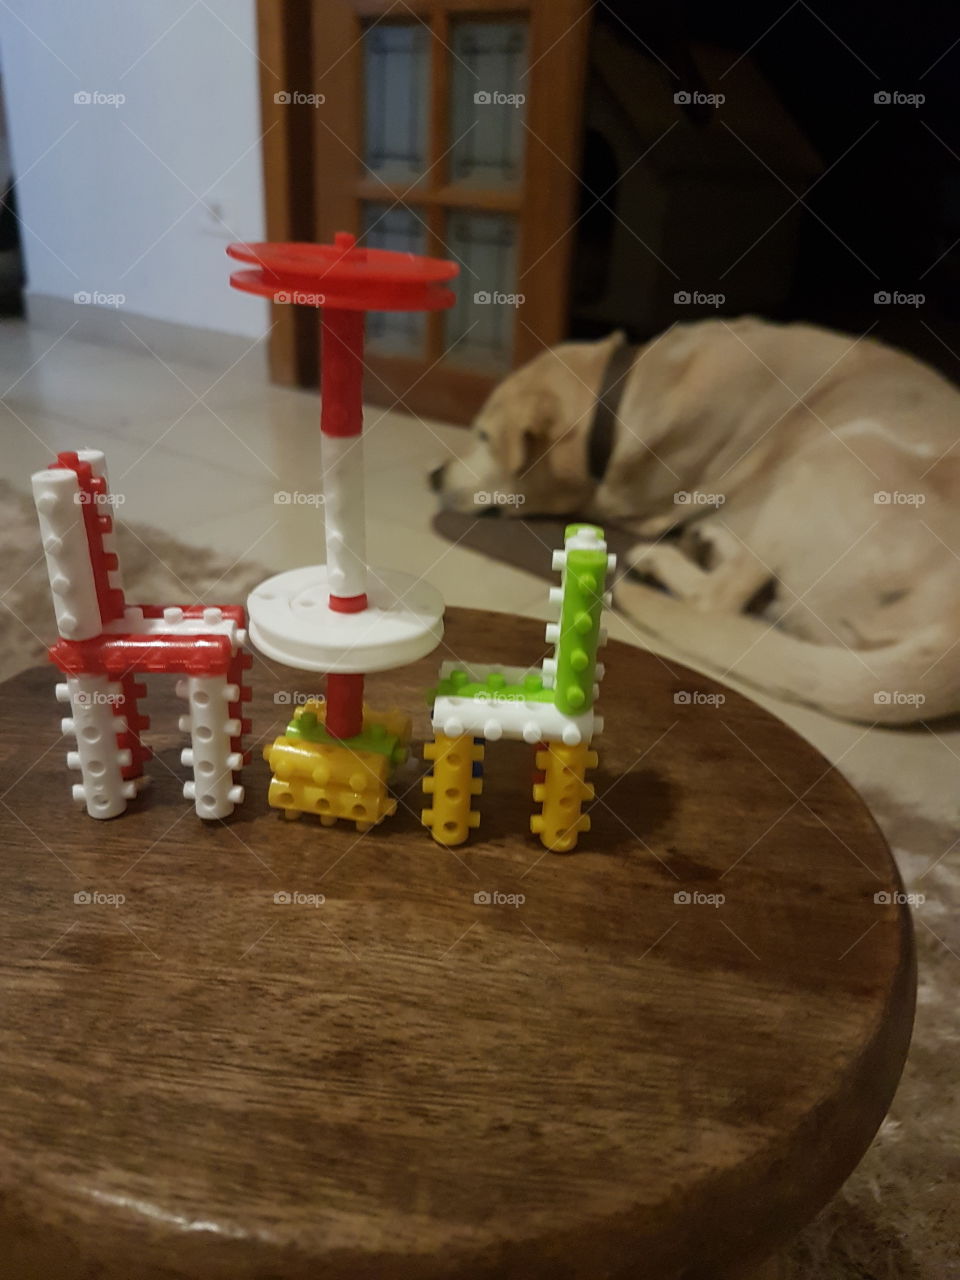 Toys and dog